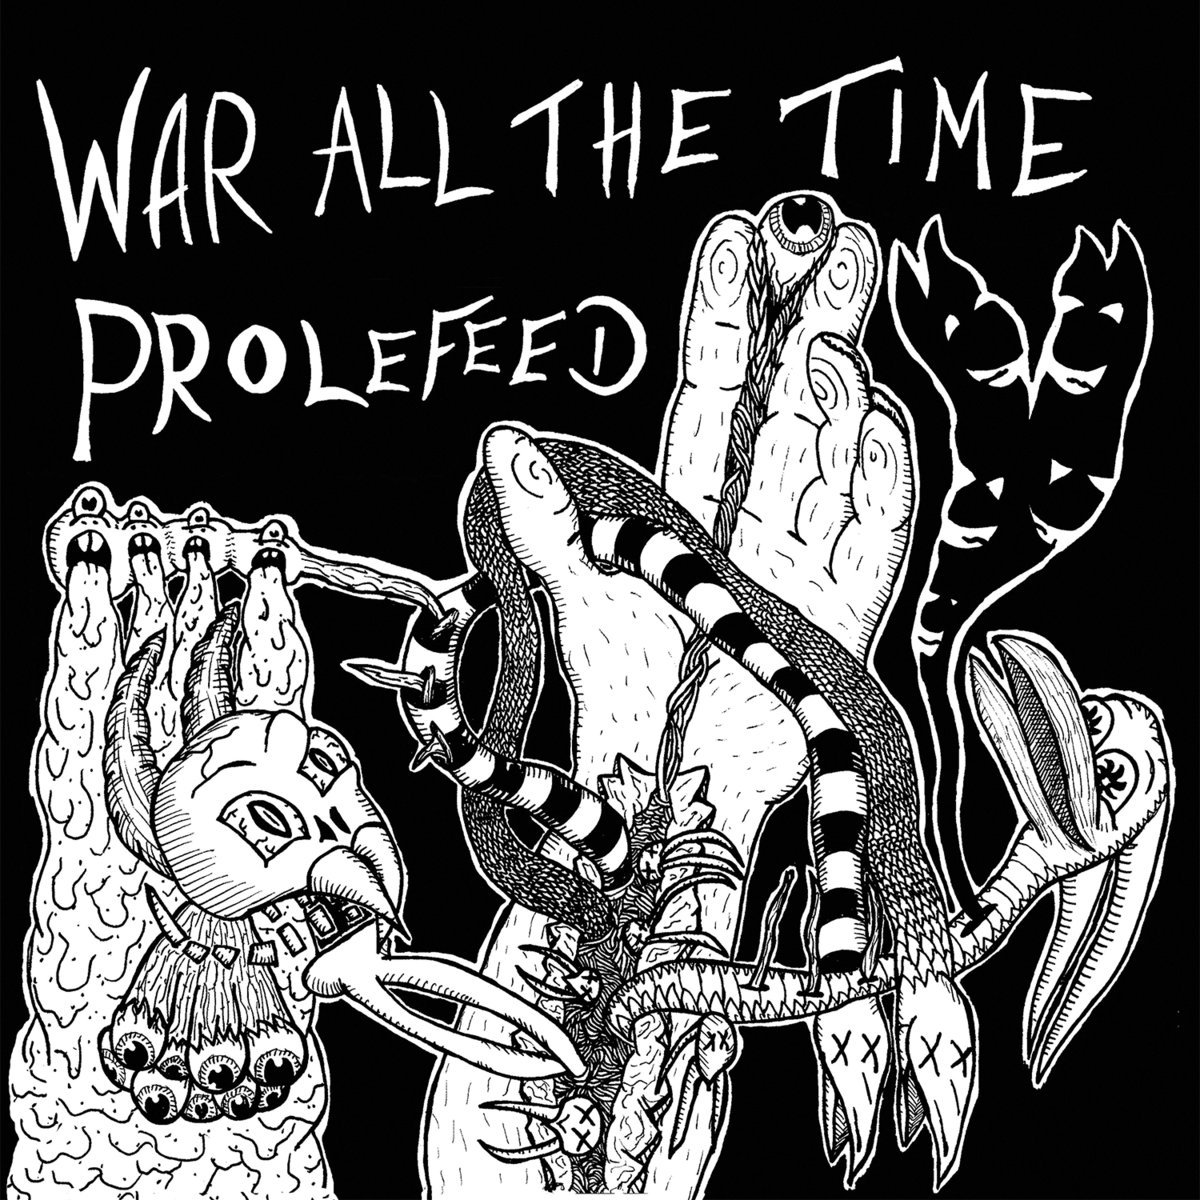 WAR ALL THE TIME - War All The Time / Prolefeed cover 